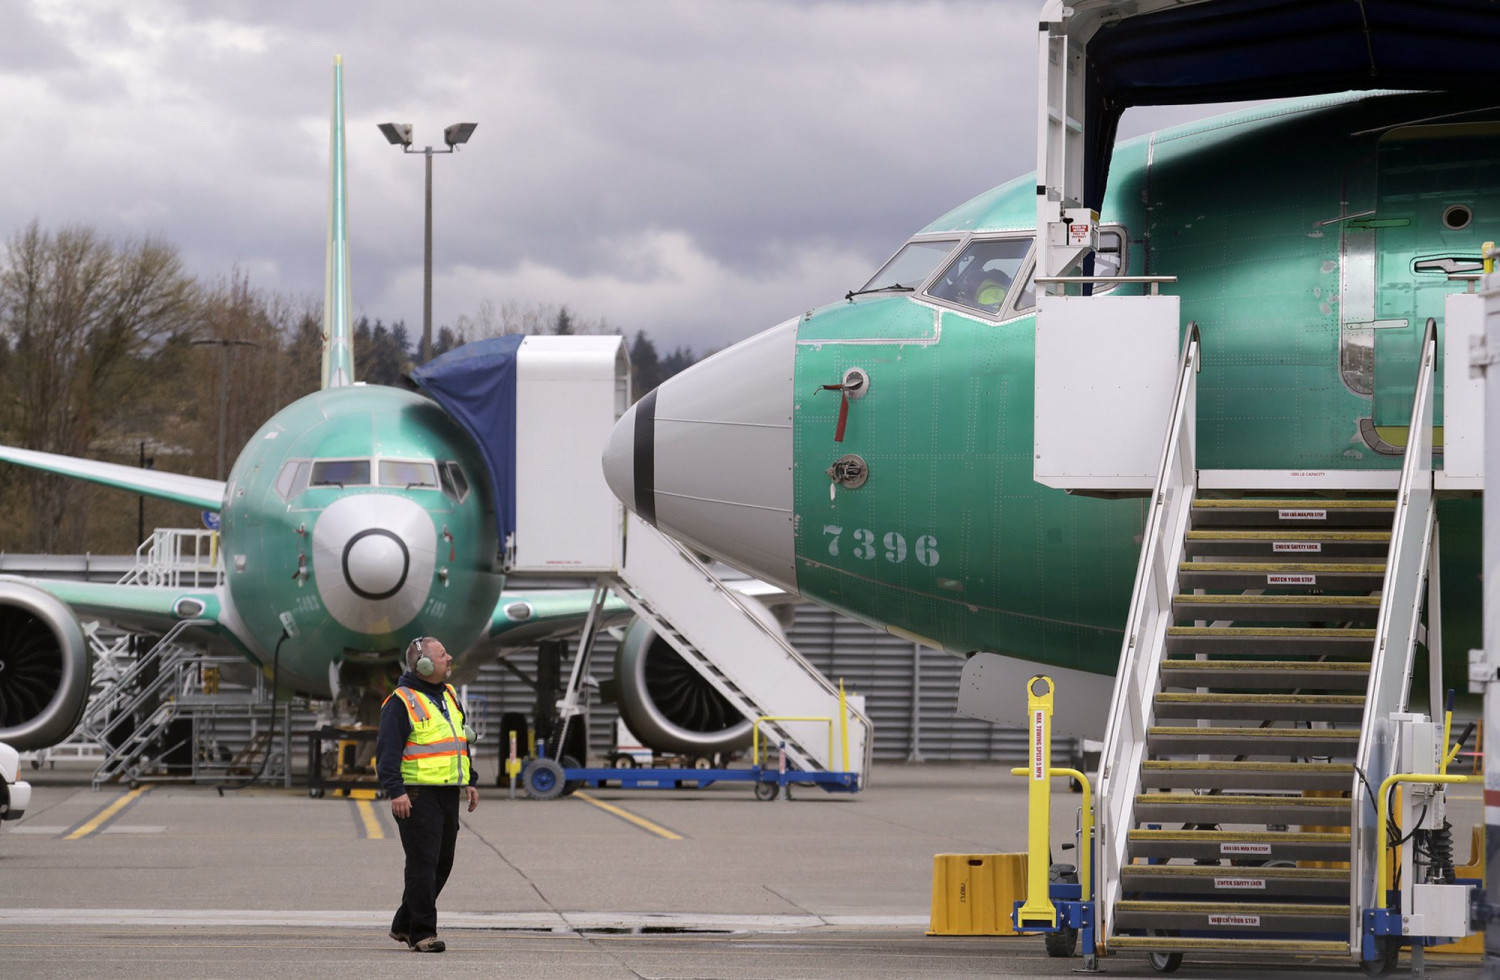 Boeing Completes 737 MAX Software Update, Working on Pilot Training Plan